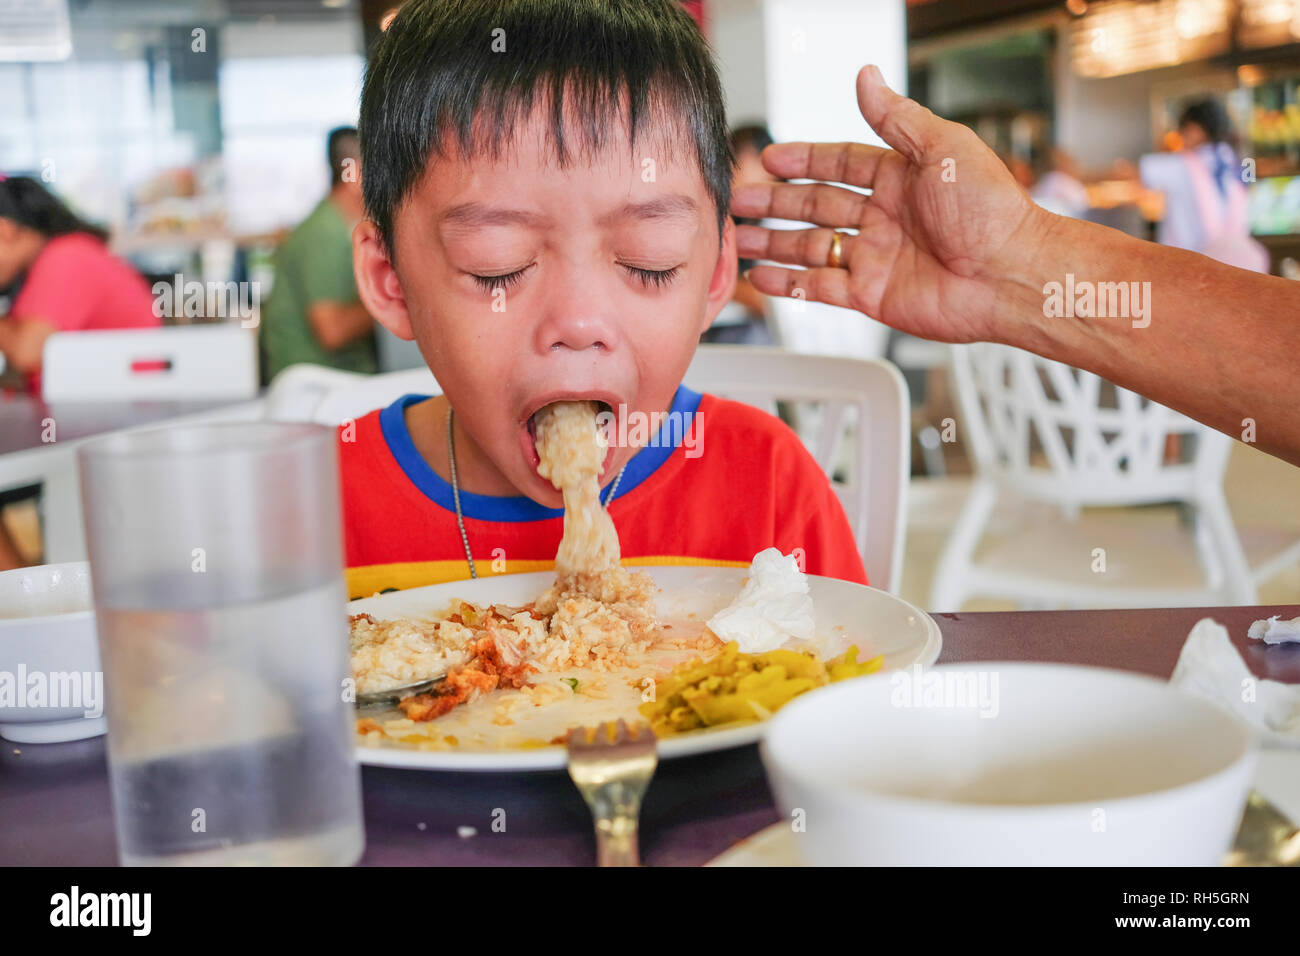 Boy puking on plate after having lunch meal in food court with helping hand Stock Photo